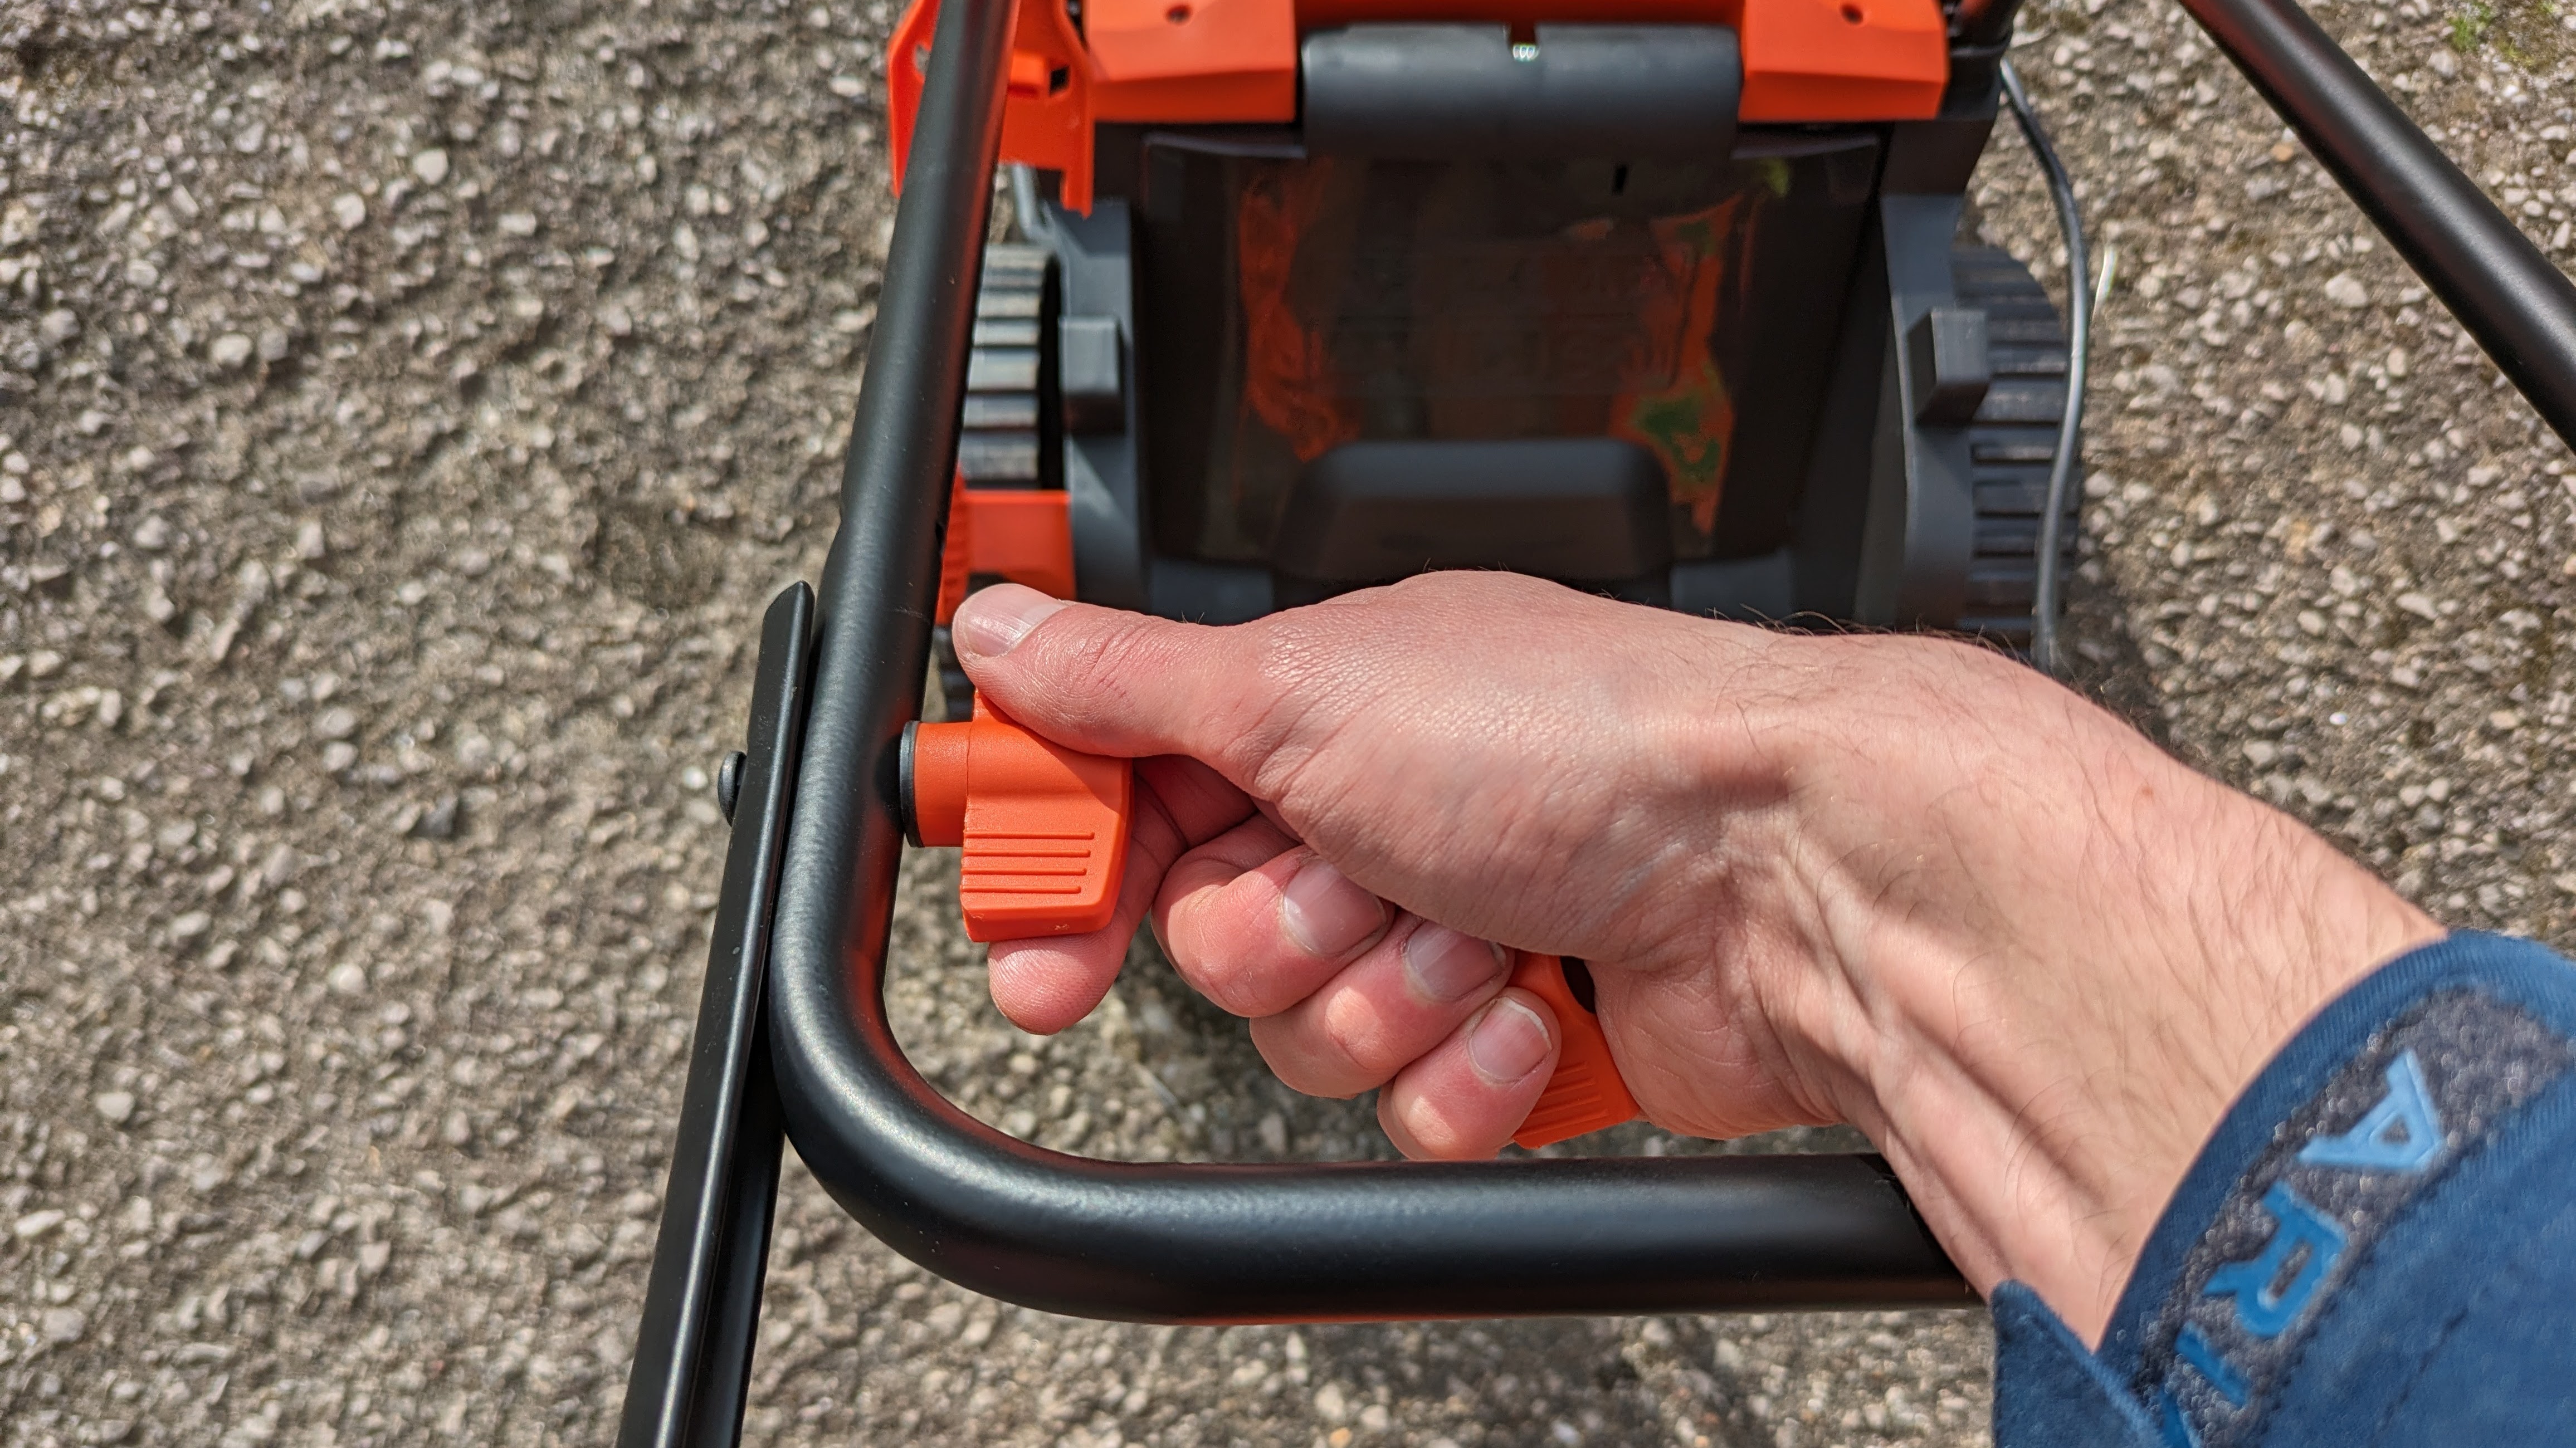 Assembling the Black + Decker lawn mower does not require the use of tools.